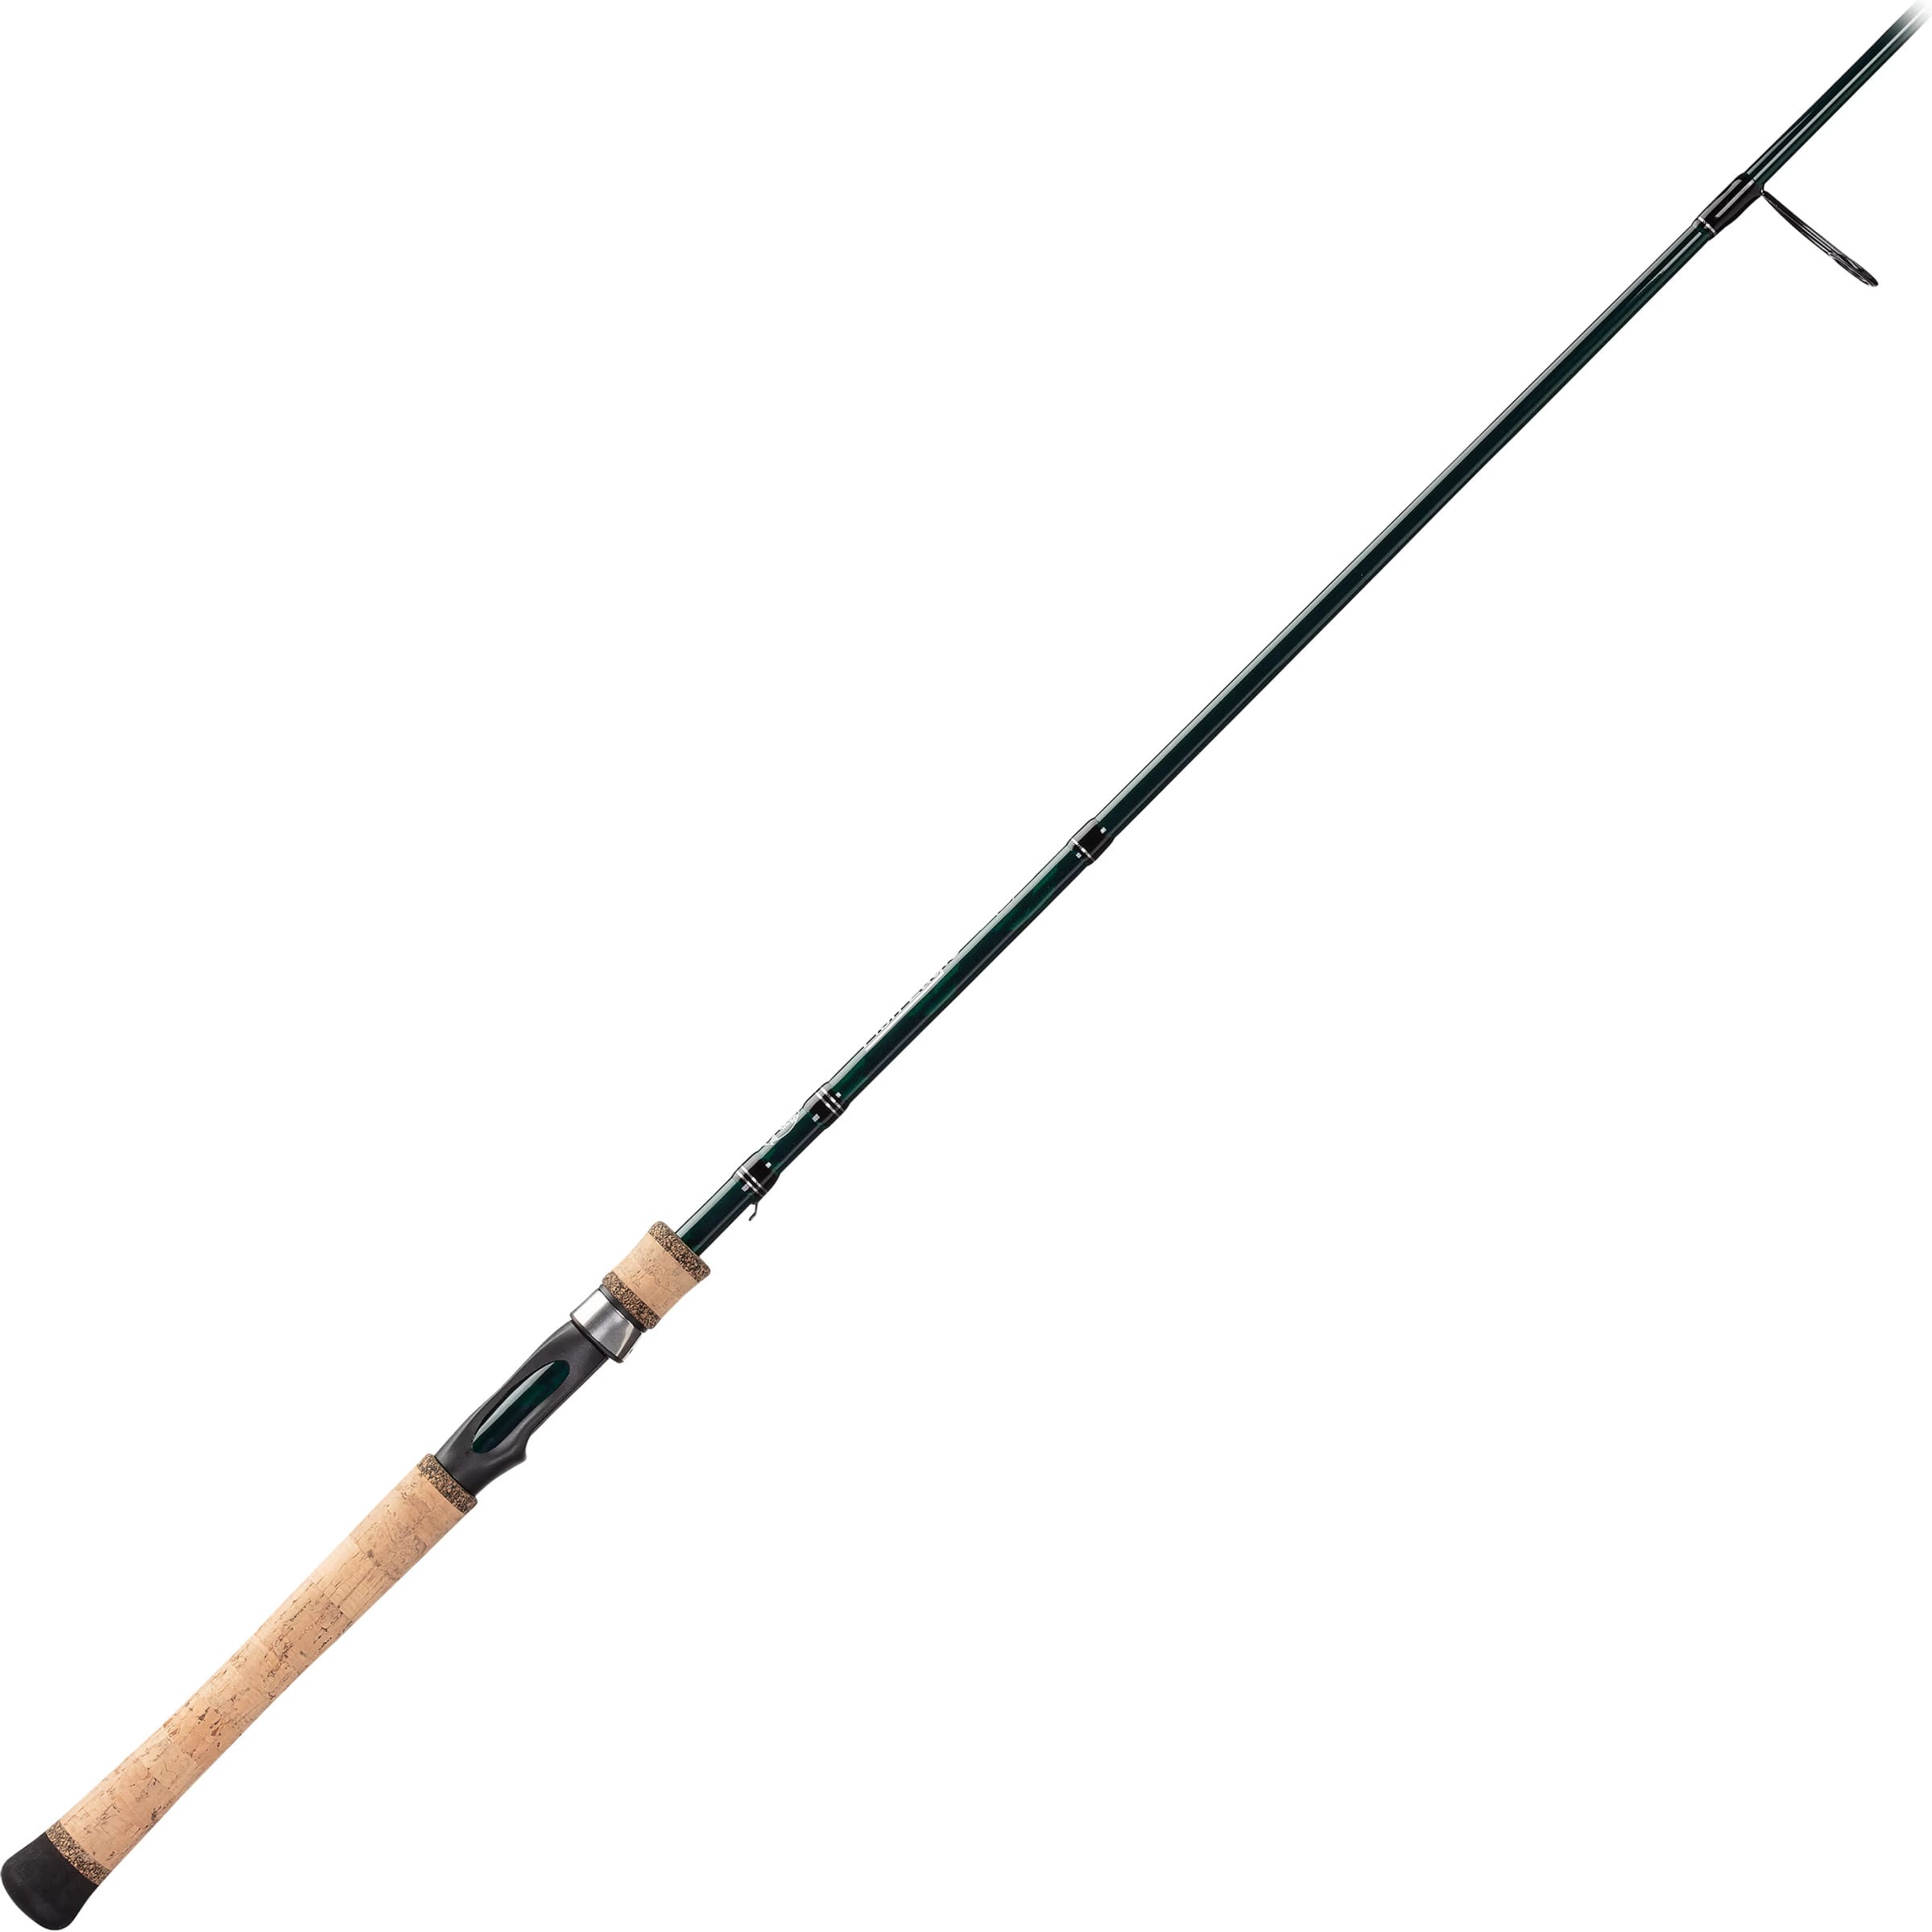 Spinning Fishing Rod Portable Graphite Spinning Fishing Rod Heavy